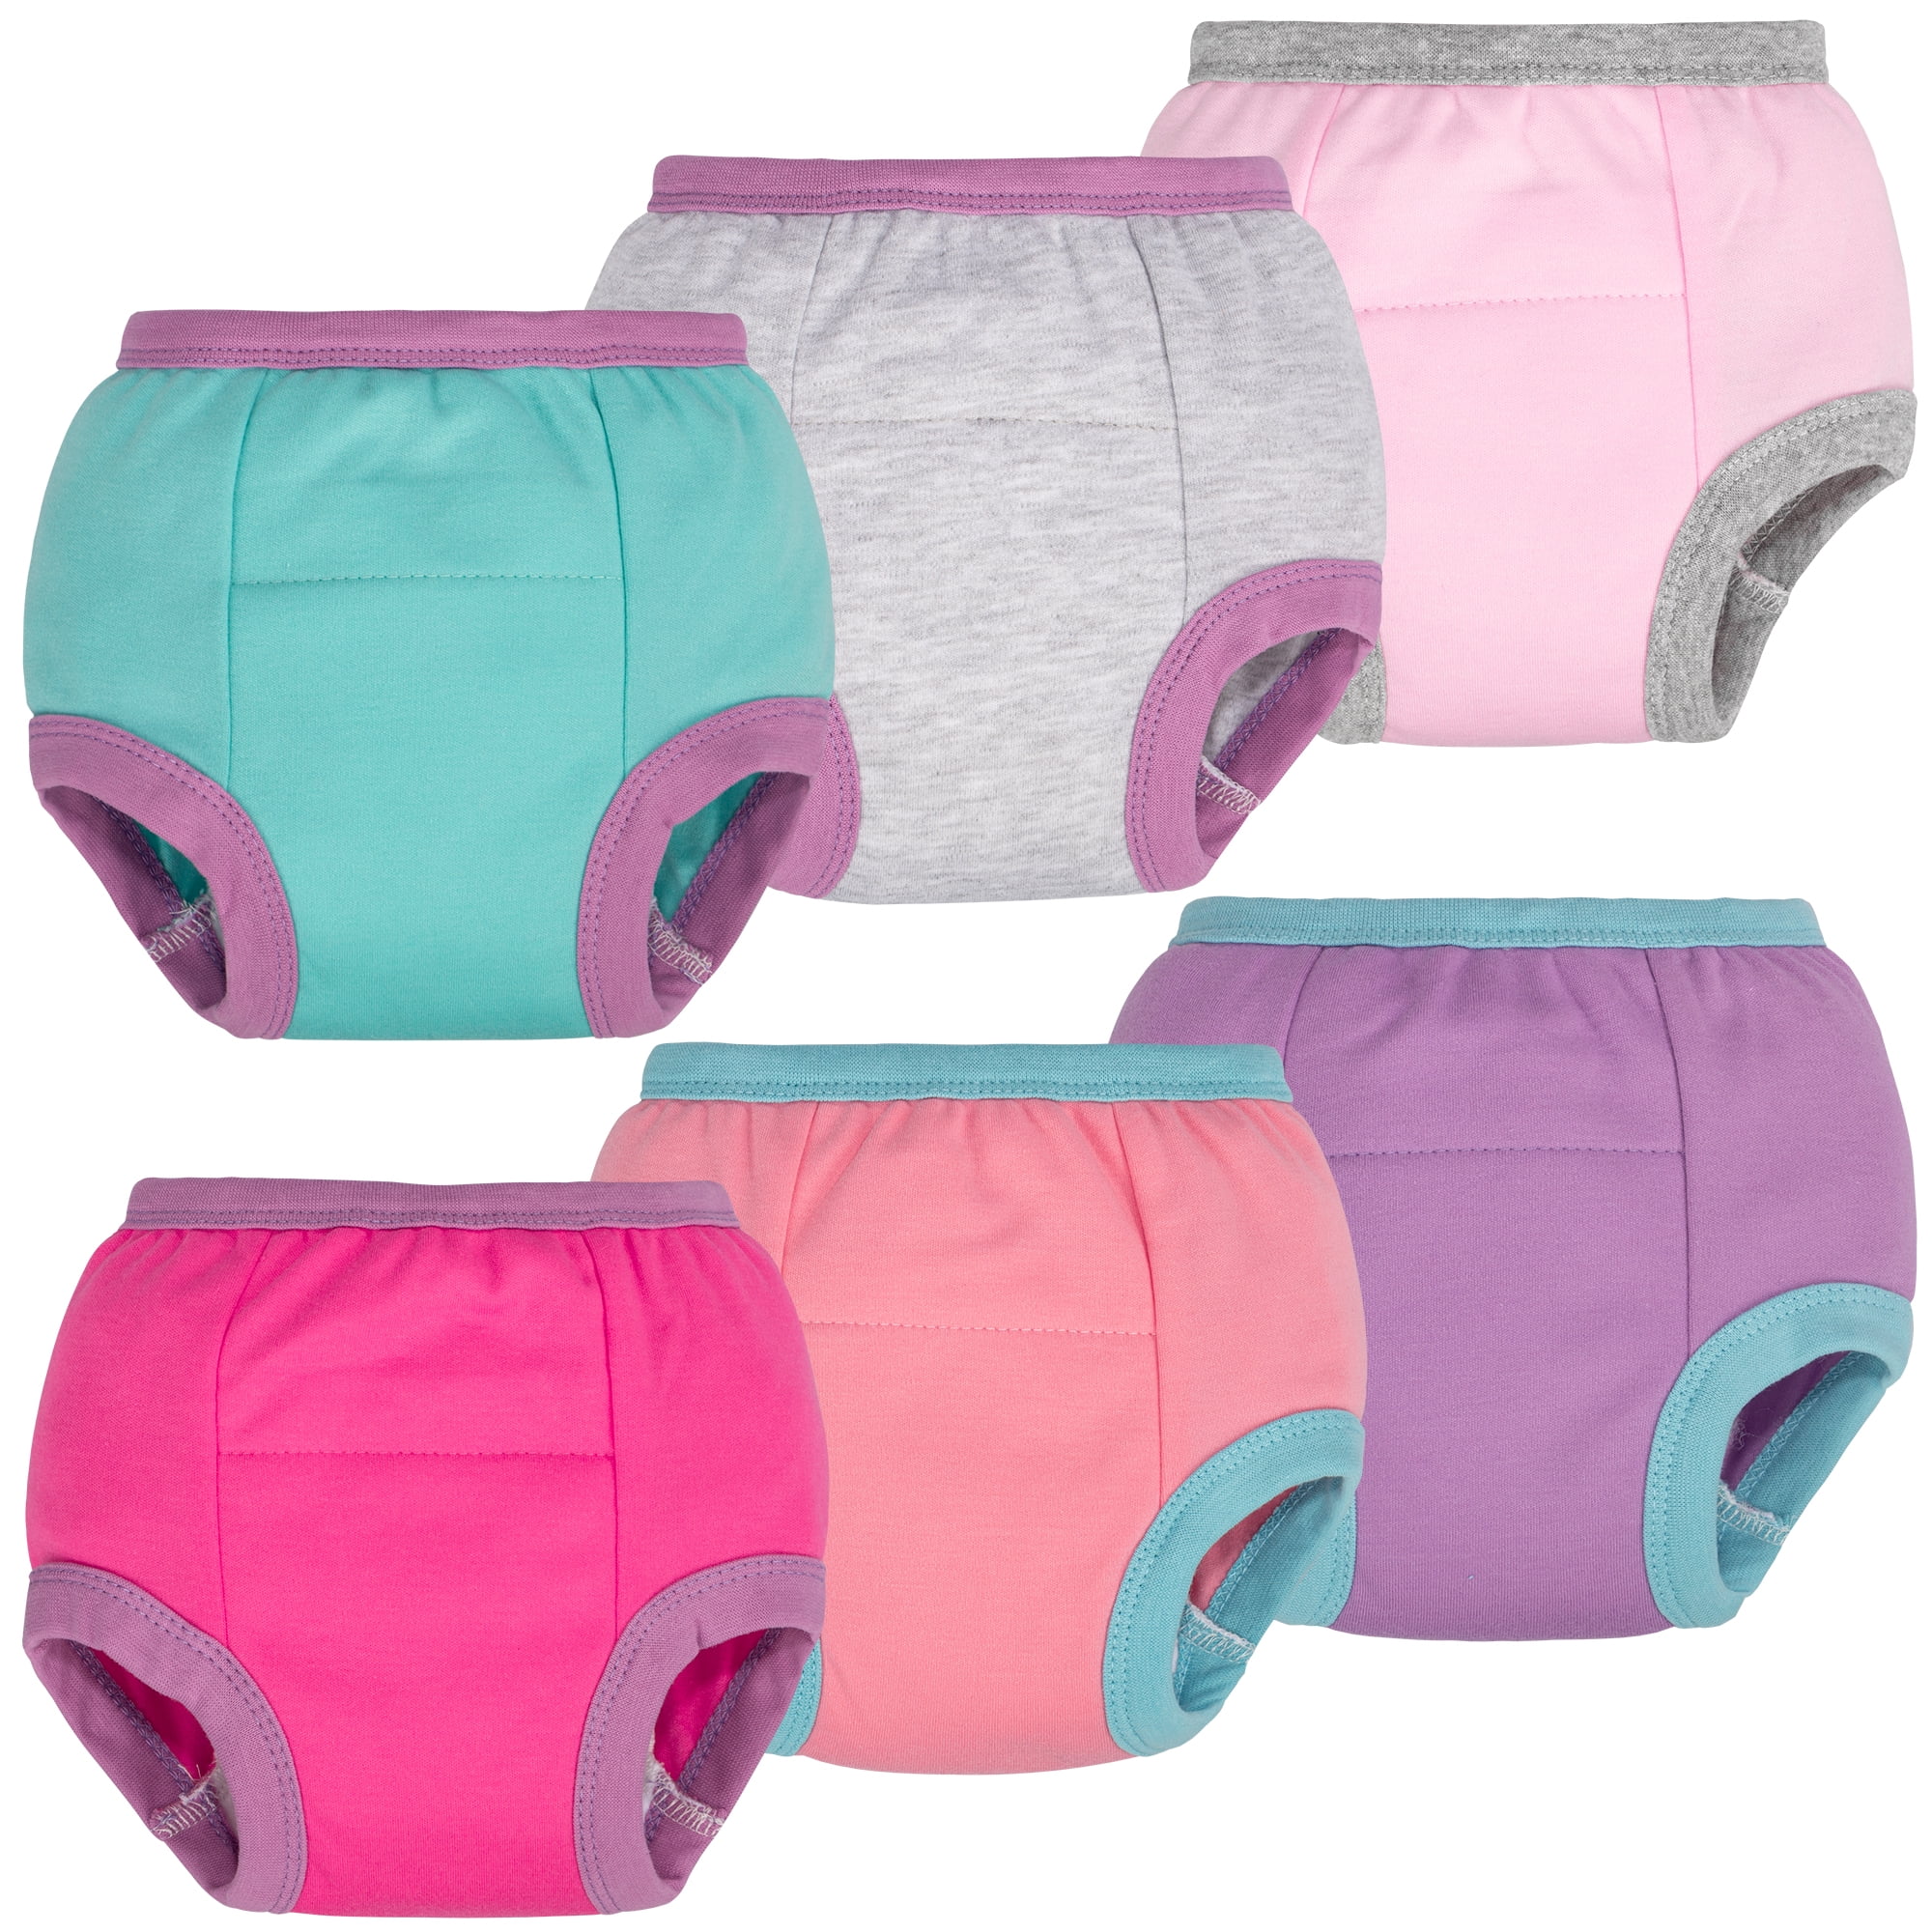 BIG ELEPHANT Baby Girls Potty Training Pants, Toddler Solid Color